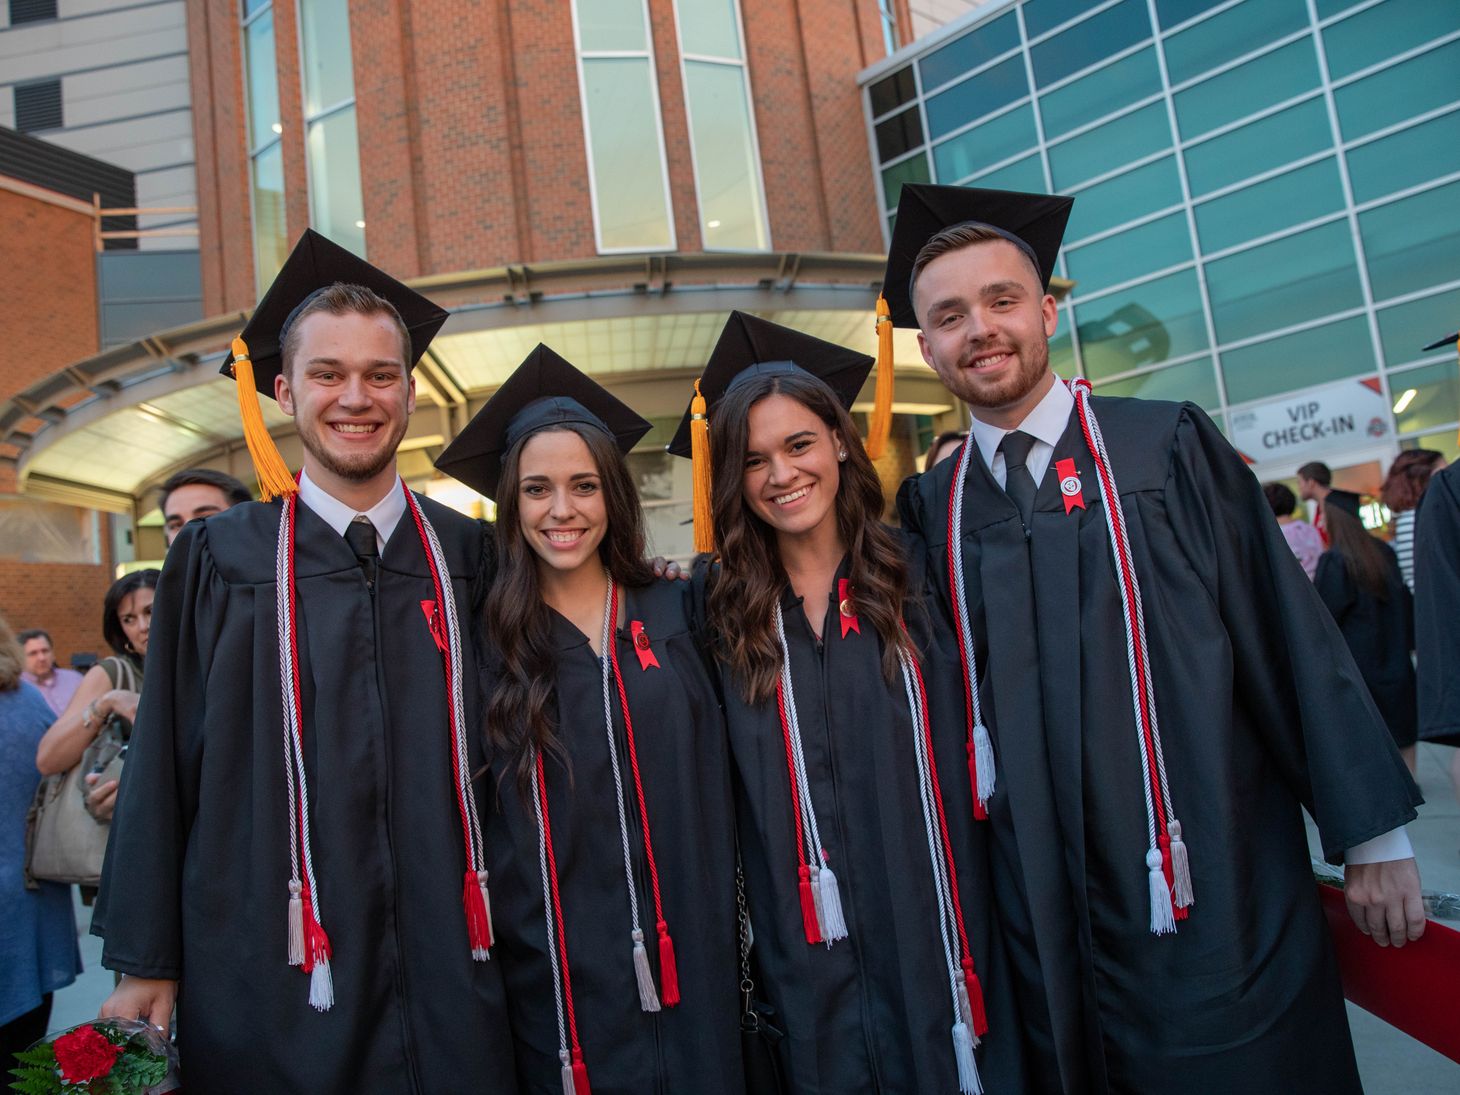 Ohio State students pose together outside of the Schottenstein Center before their Convocation ceremony